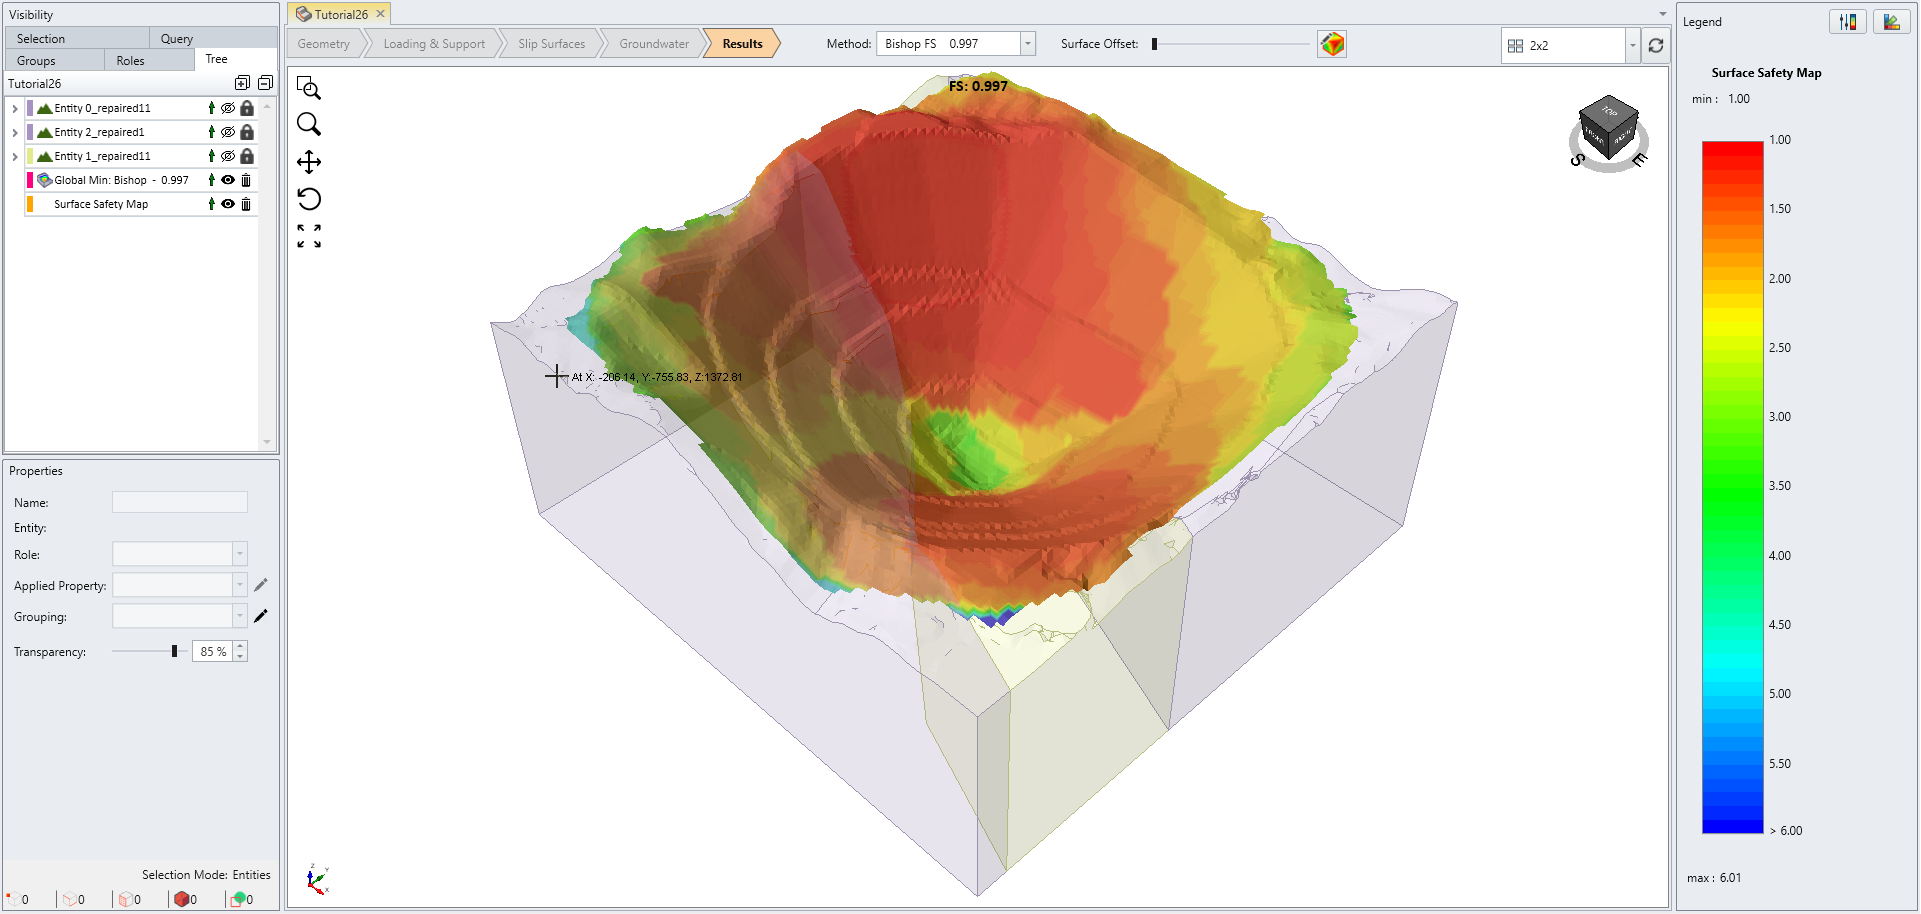 Safety Surface Map Model View